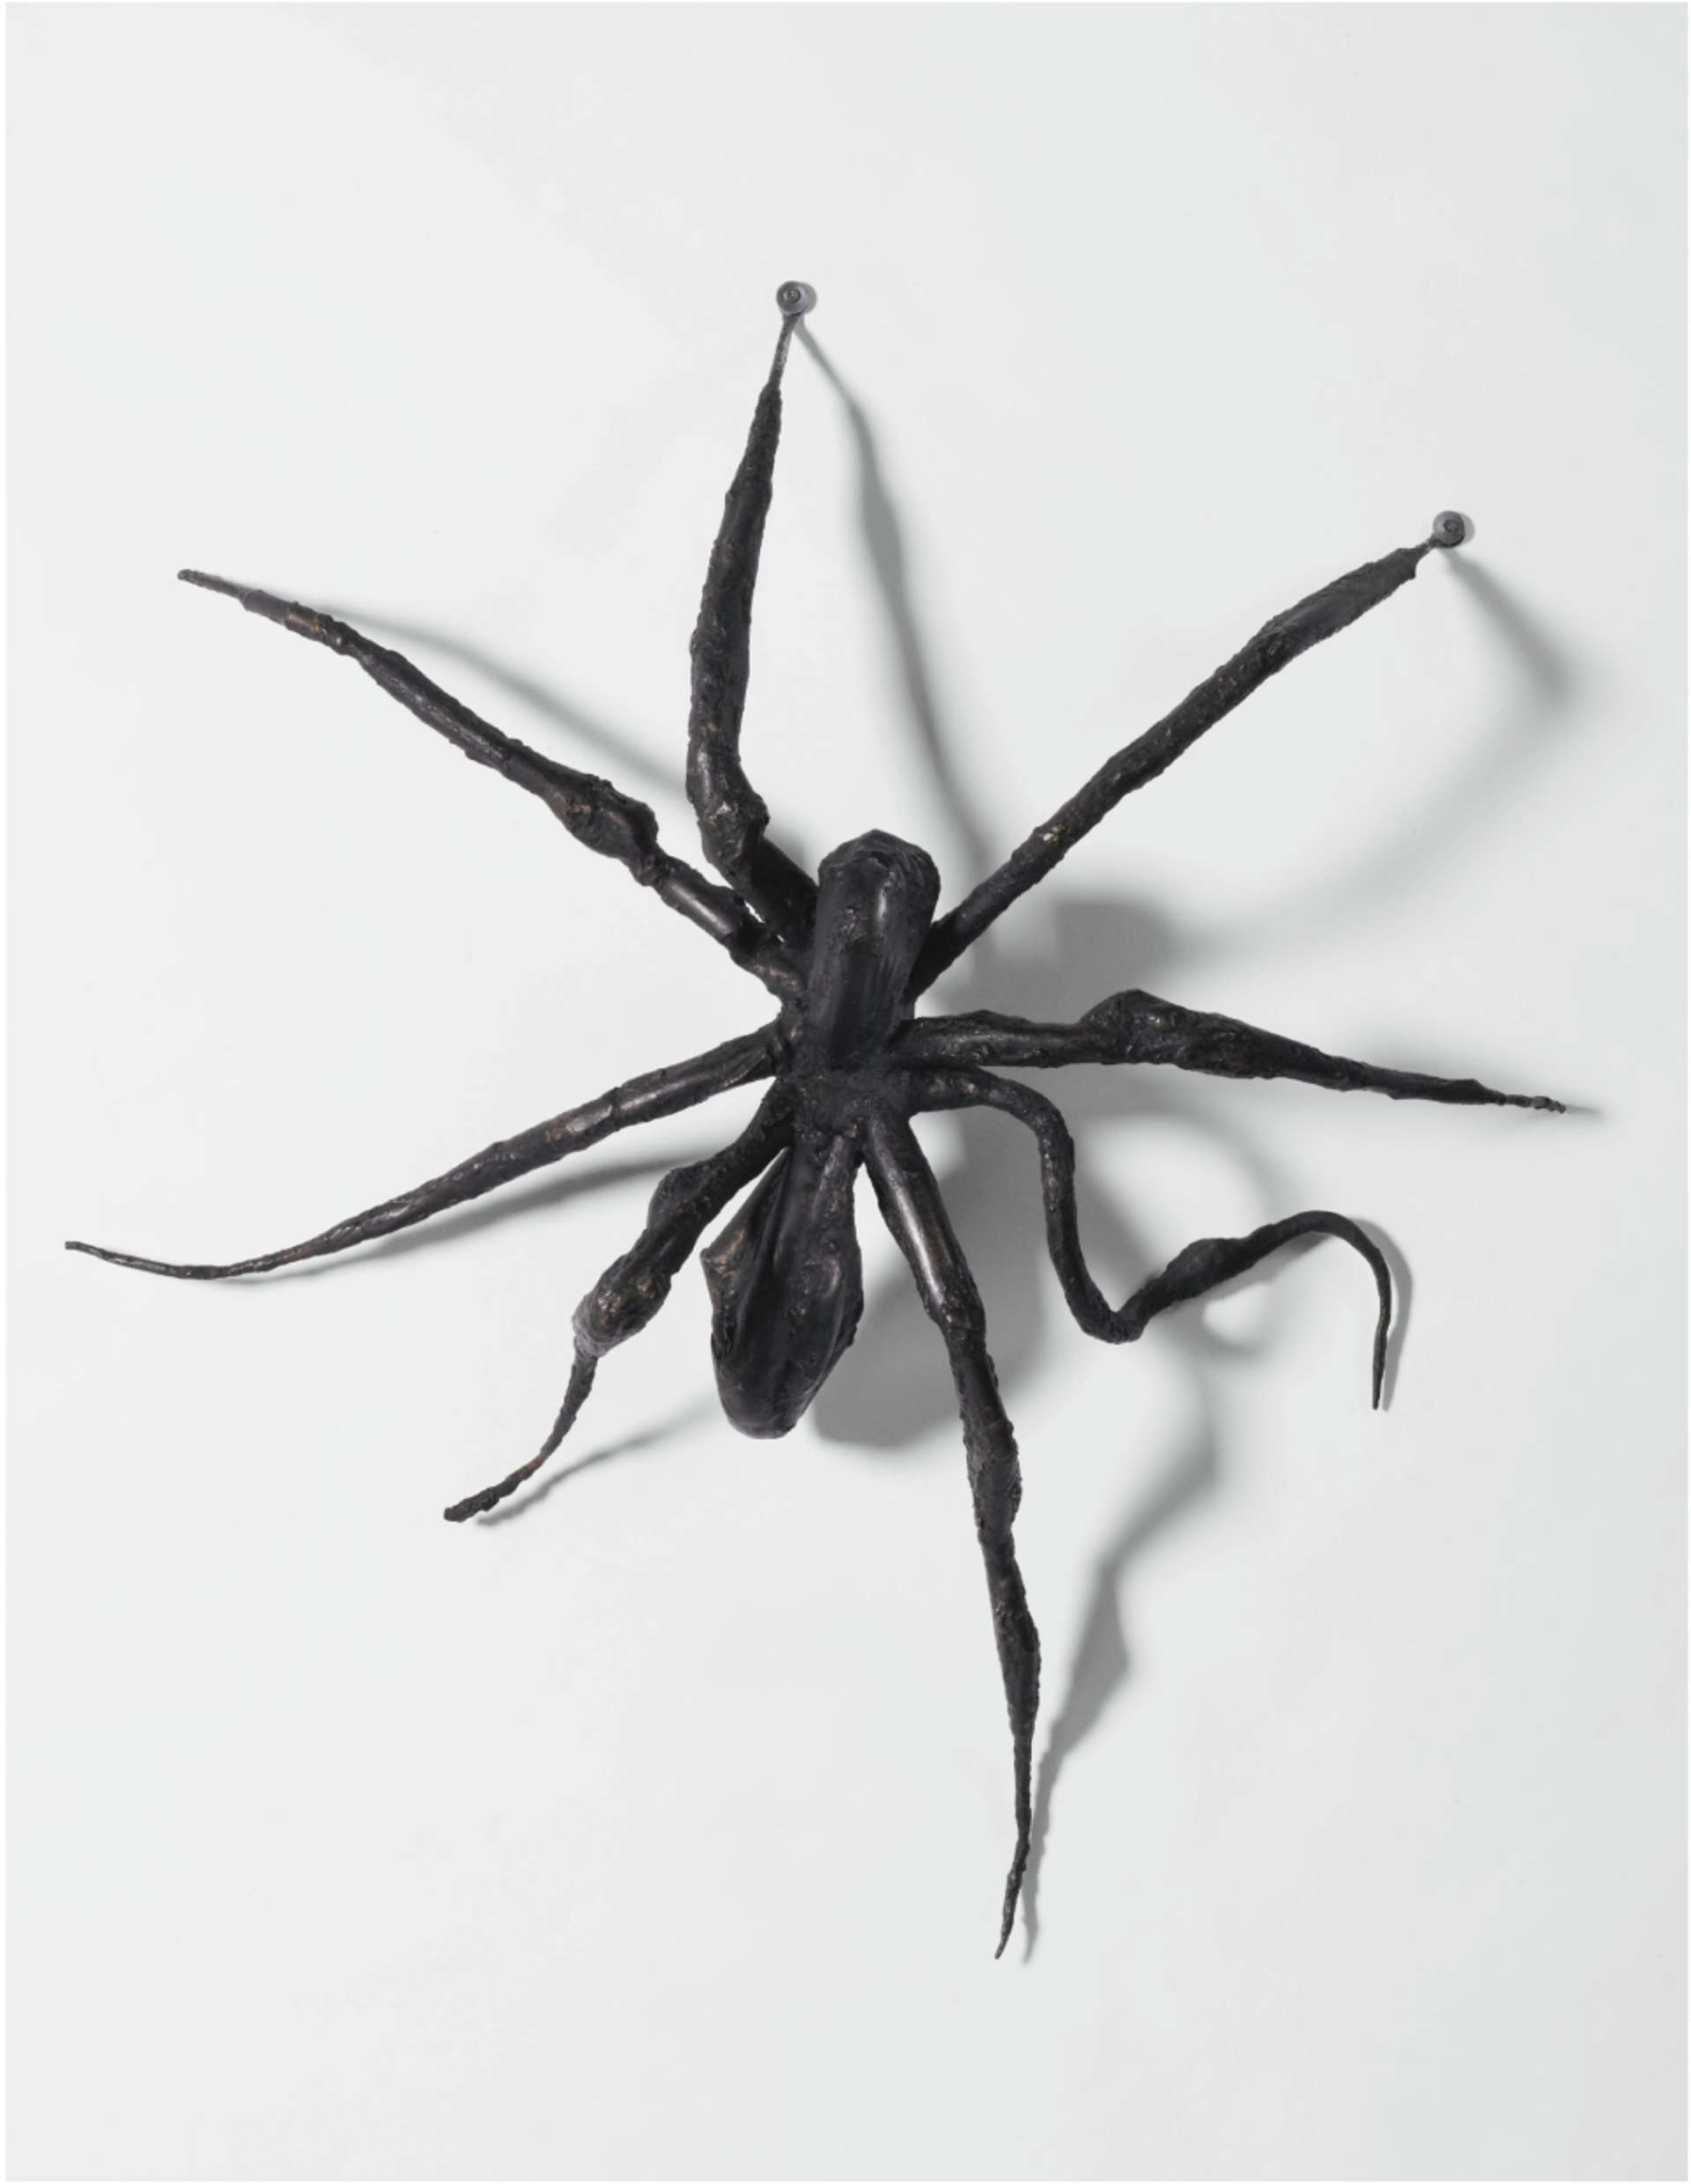 A bronze cast spider sculpture climbing up a white wall, with one leg on the left side slightly bent, creating the illusion of movement.